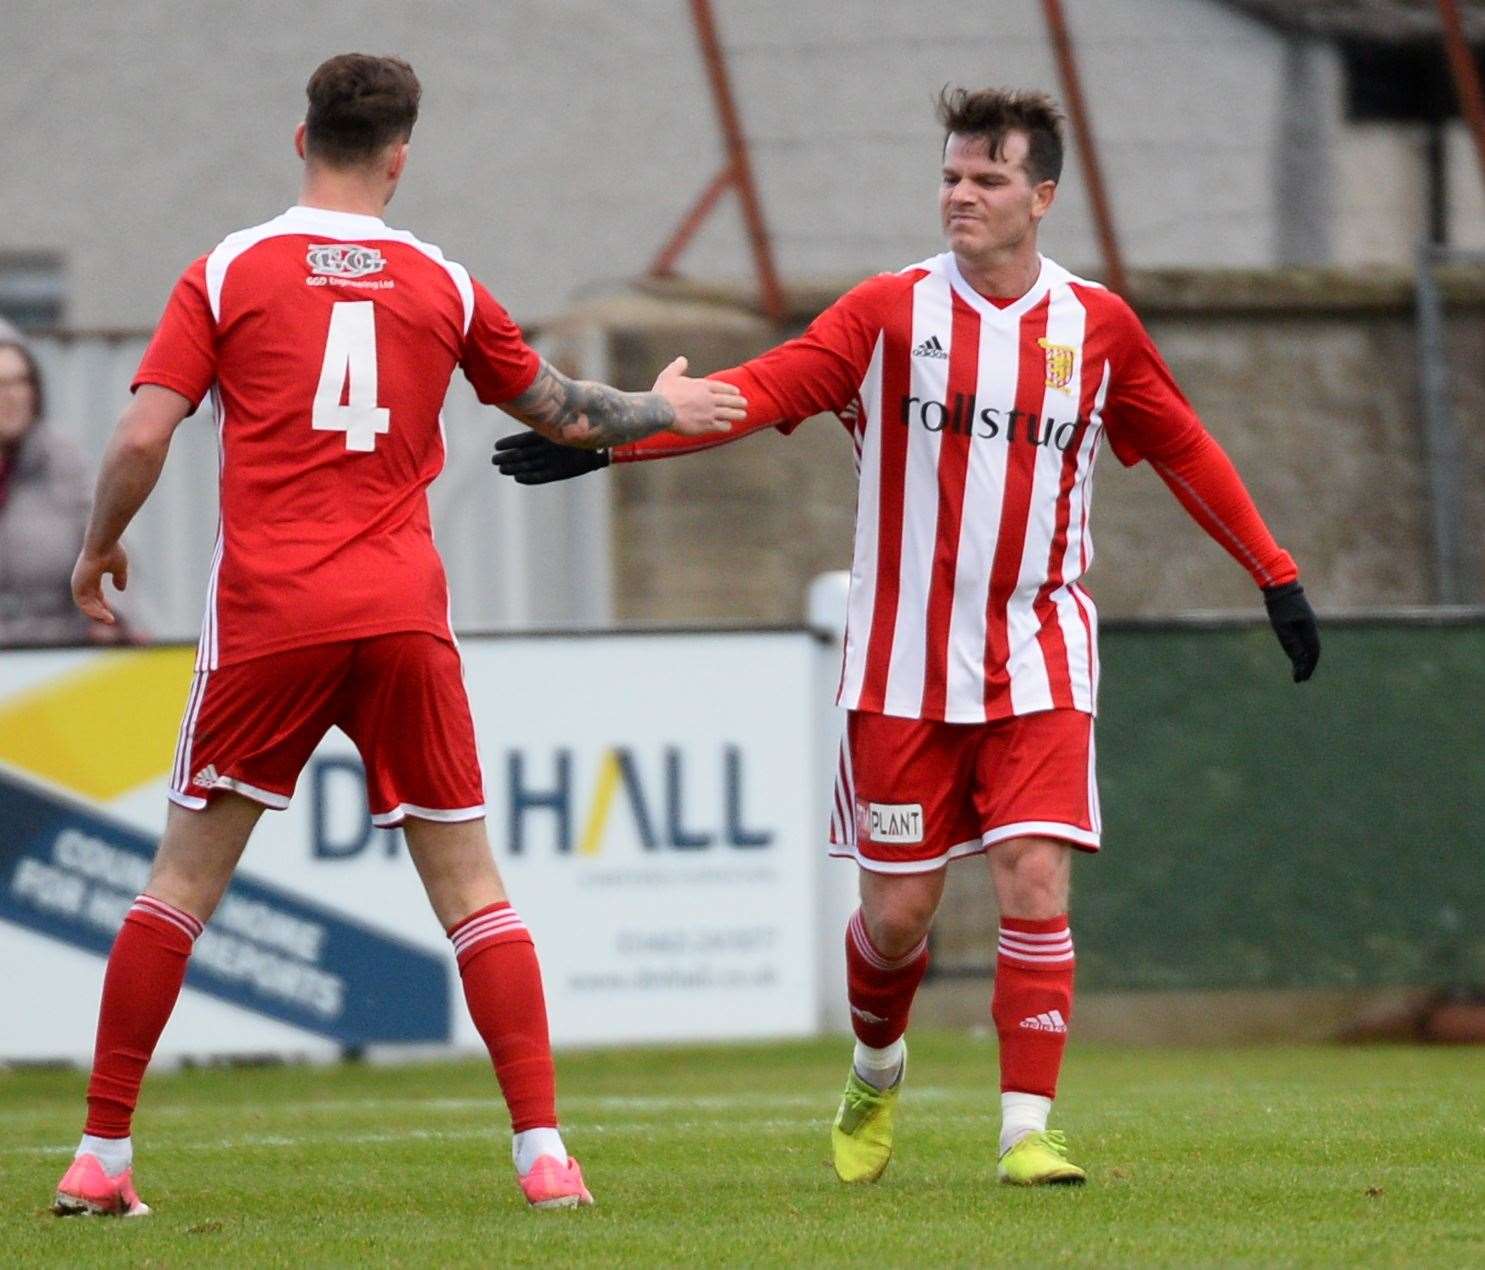 Formartine's Conor Gethins (right) was on target against his former club Nairn. Picture: Gary Anthony